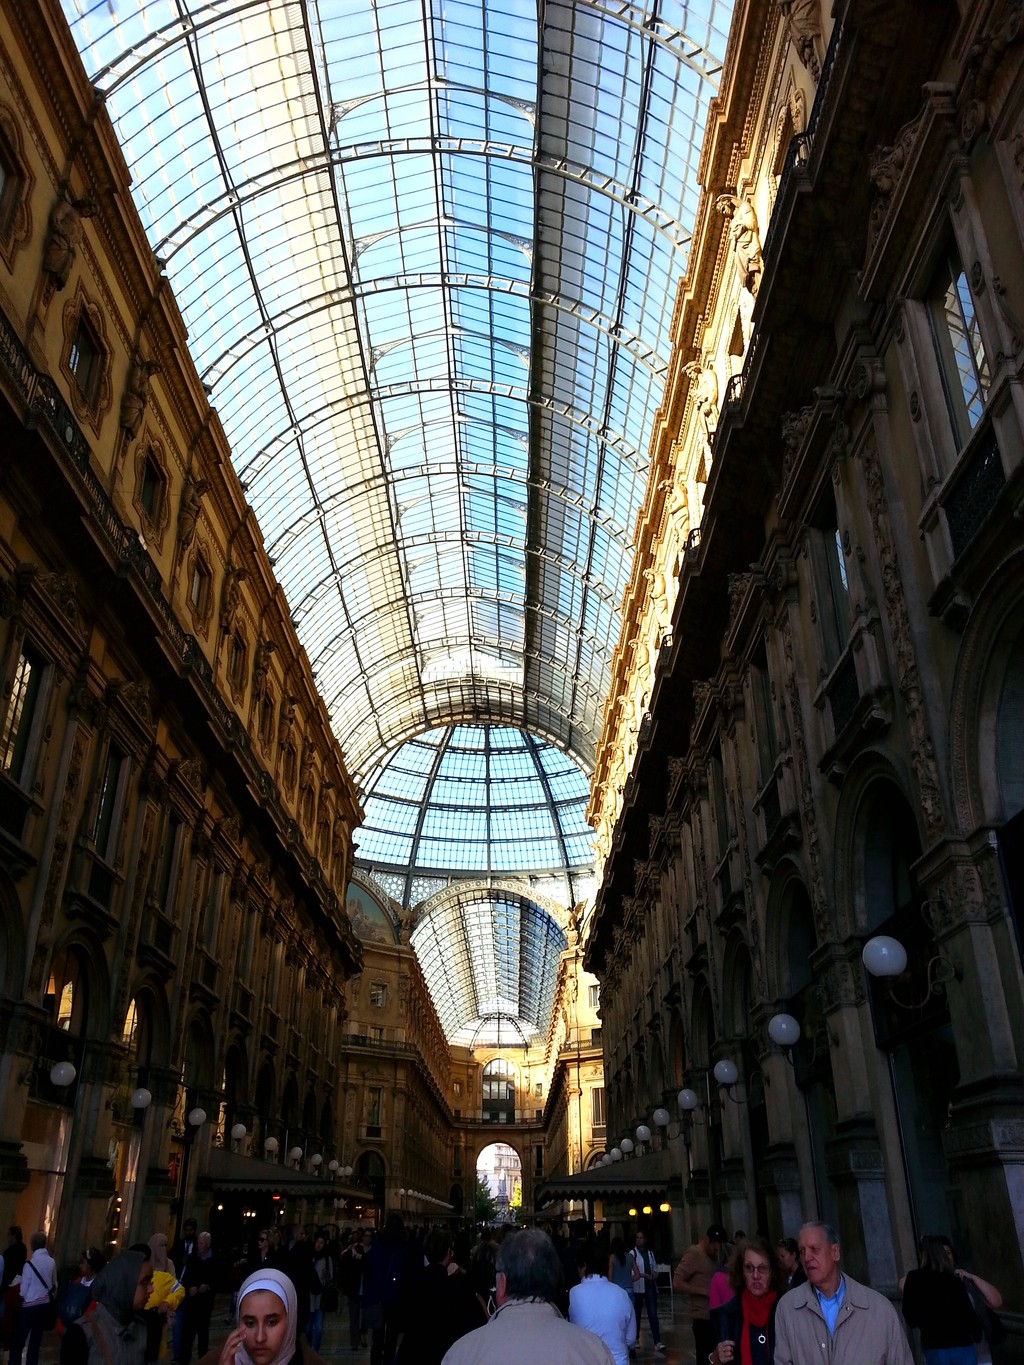 Some more interesting facts about the great Galleria Vittorio Emanuele